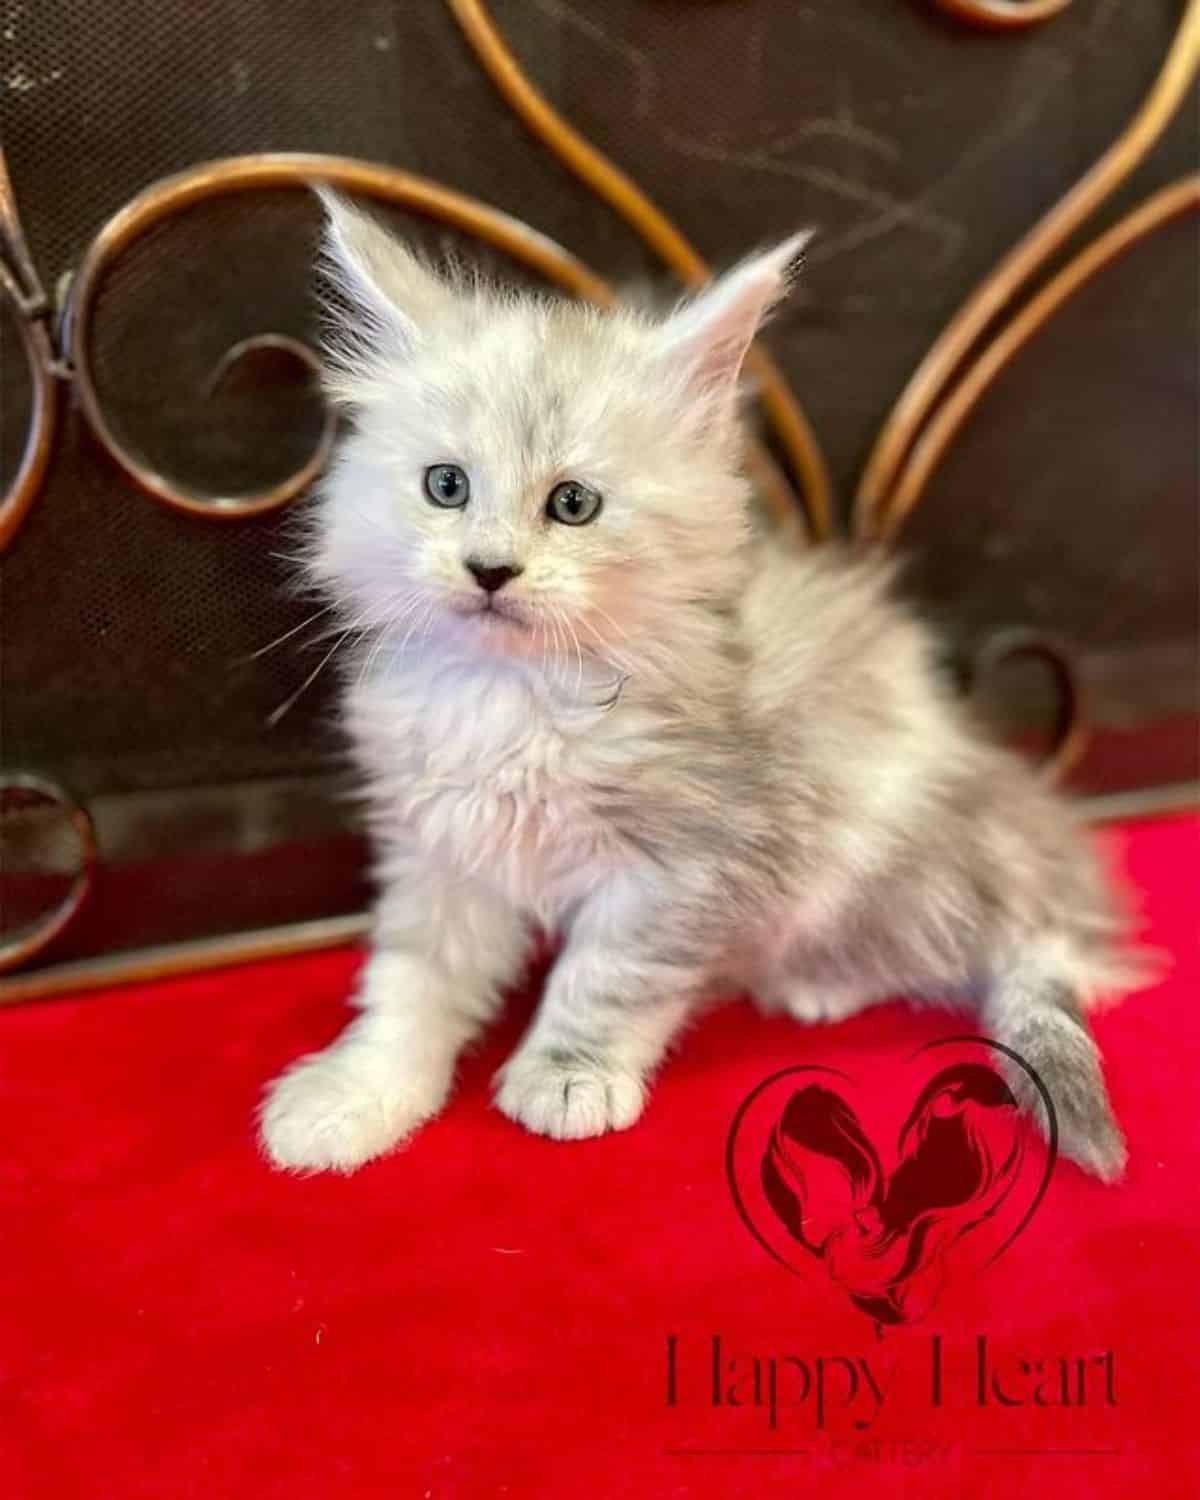 A fluffy gray maine coon kitten is sitting on a red carpet.